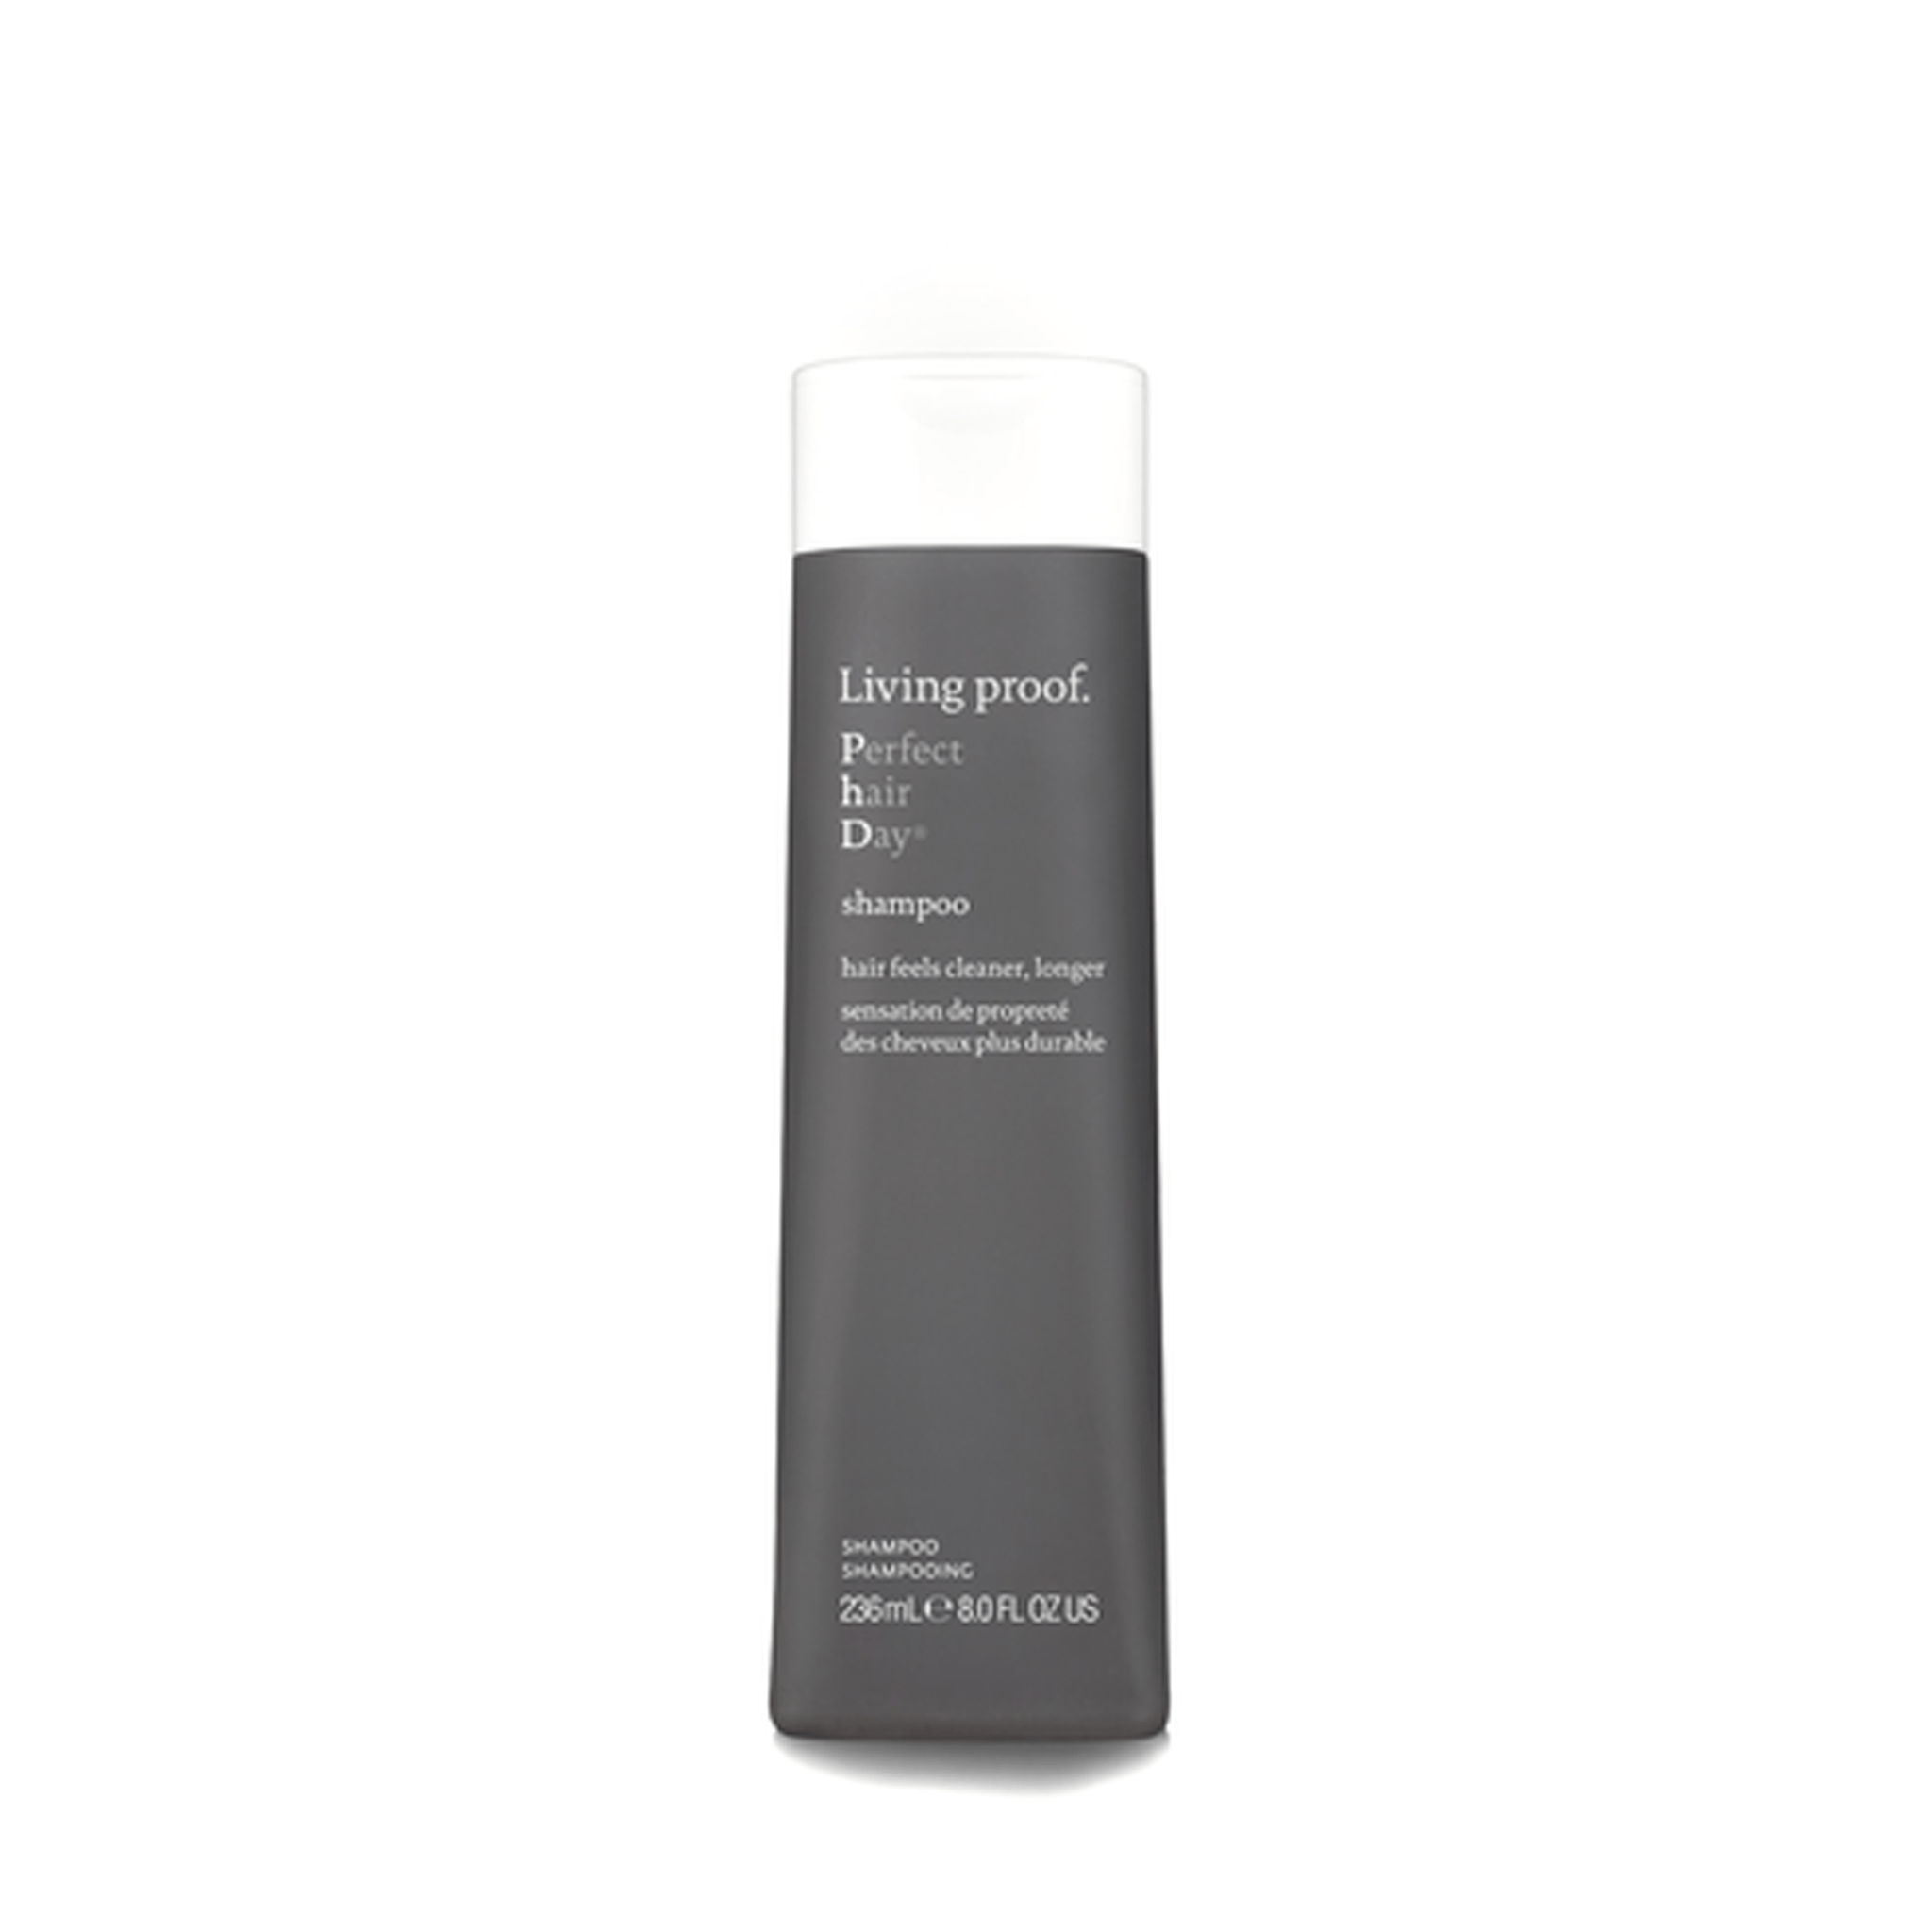 Living Proof. Perfect Hair Day Shampoing - 236 ml - Concept C. Shop